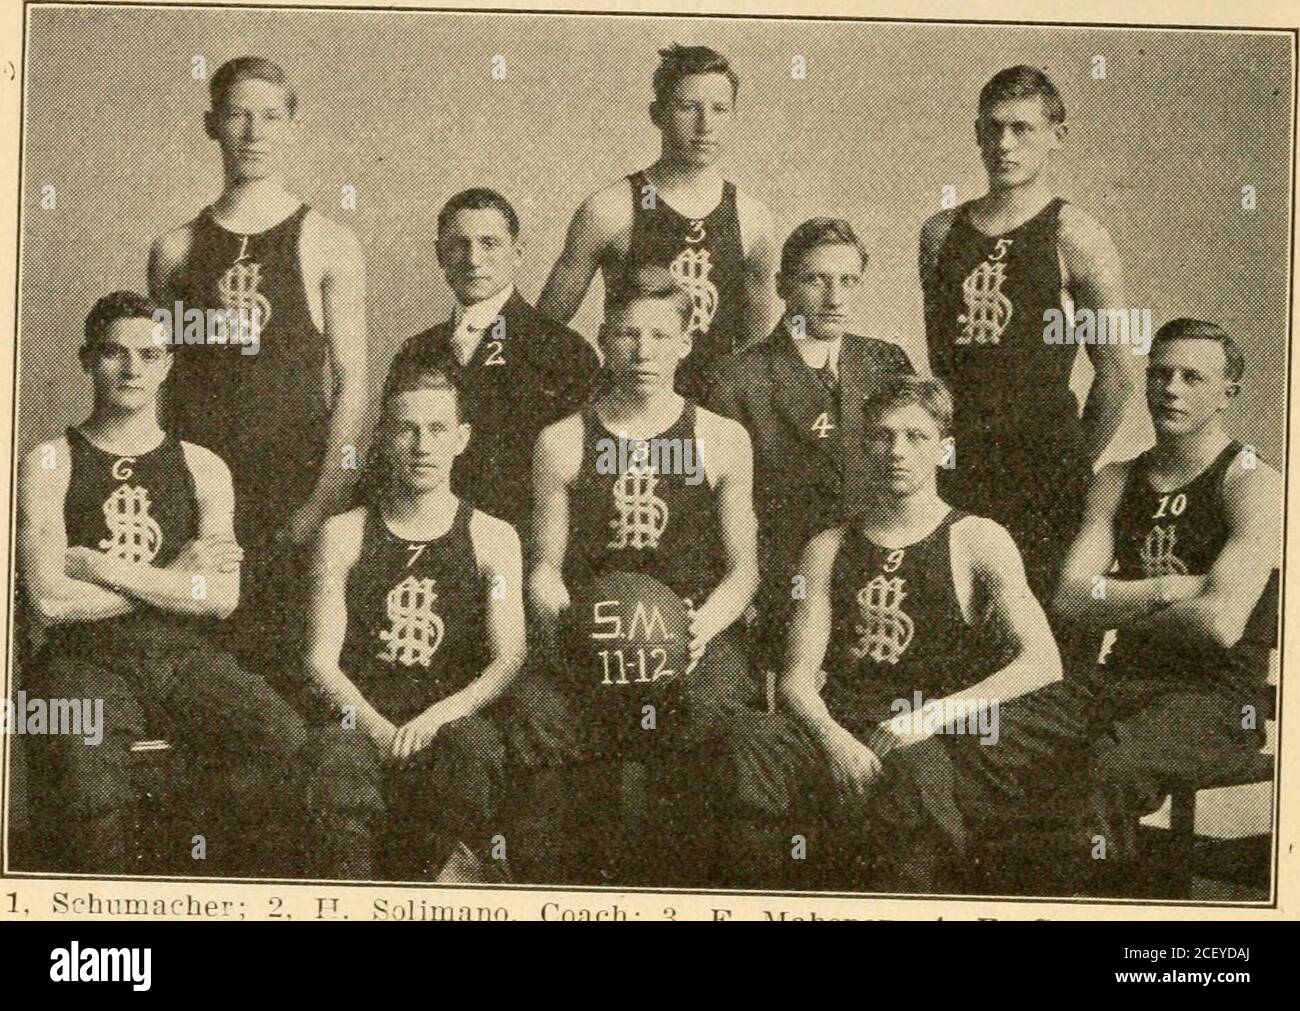 . Spalding's official collegiate basket ball guide. 07—Penna., Penna.,1907-08—Penna., Penna., 1901-02—Prince., Prince.,1902-03—Prince., Prince.,1903-04—Prince., Prince.,1904-05—Prince., Prince.,1905-06—Prince., Prince.,1906-07—Prince., Prince.,• Forfeit. 31; Cornell, 12.29; Cornell. 22.29; Cornell, 25.19; Cornell, 33.25 ; Cornell, 22.26; Cornell, 22.30; Cornell, 26.28; Cornell, 19.24; Cornell, 15.37: Cornell, 27. [908-09—Penna., 17; Cornell, 16. Penna., 34; Cornell, 21.1909-10—Penna., 11 ; Cornell, 28. Penna., 33; Cornell, 23.1910-11—Penna., 34; Cornell, 24. Penna., 14; Cornell, 16.[911-12—Pen Stock Photo